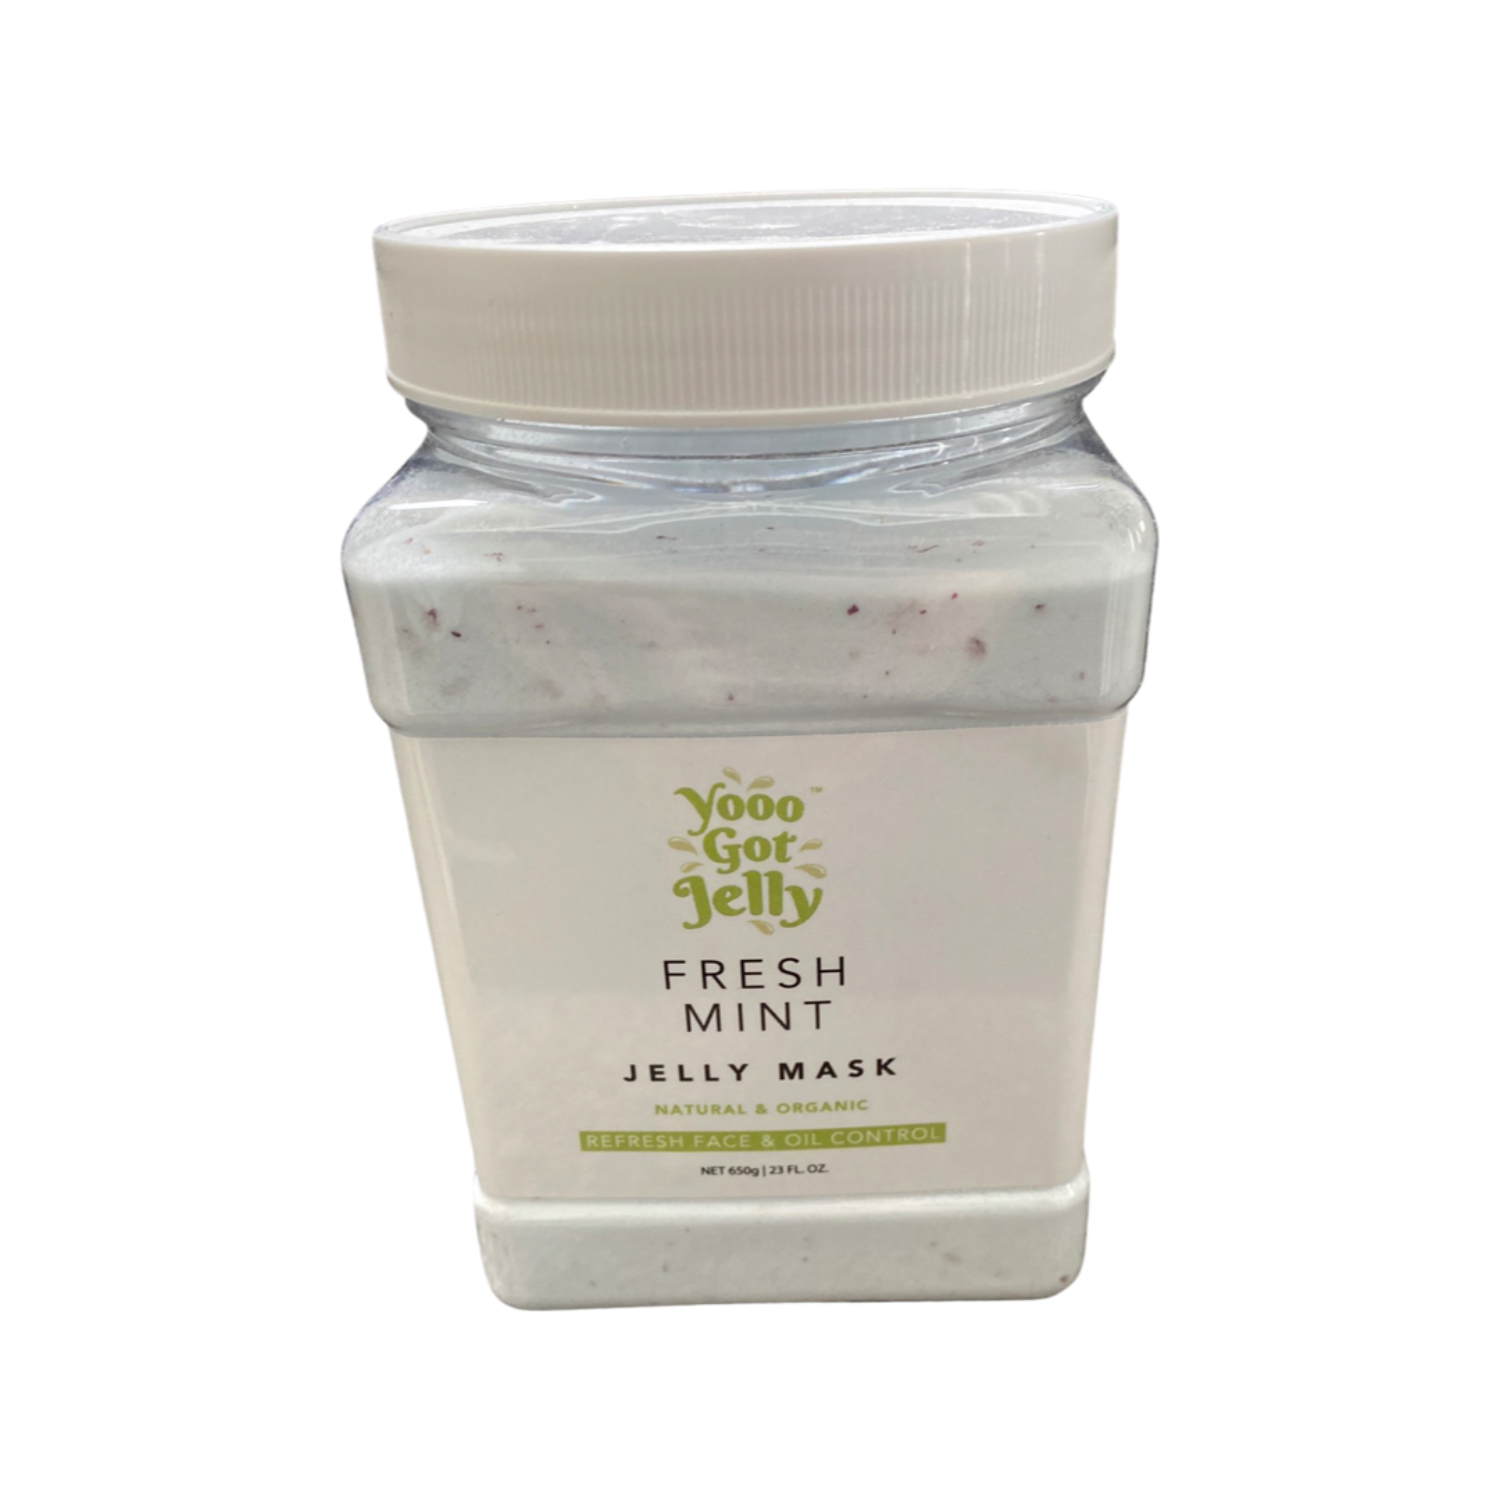 FRESH MINT JELLY MASK - Refreshing + Oil Control